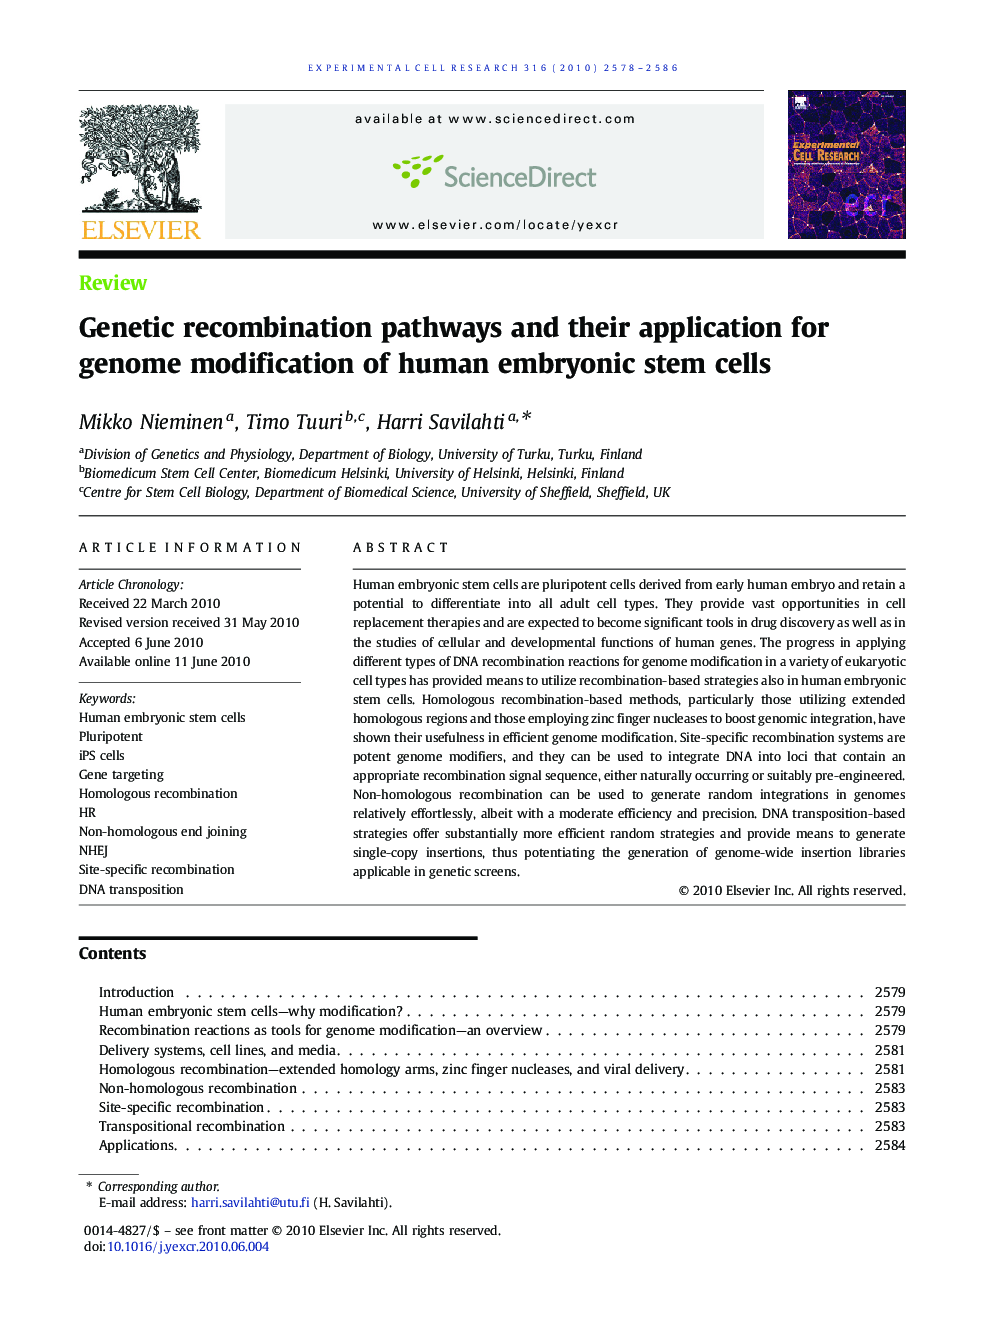 Genetic recombination pathways and their application for genome modification of human embryonic stem cells